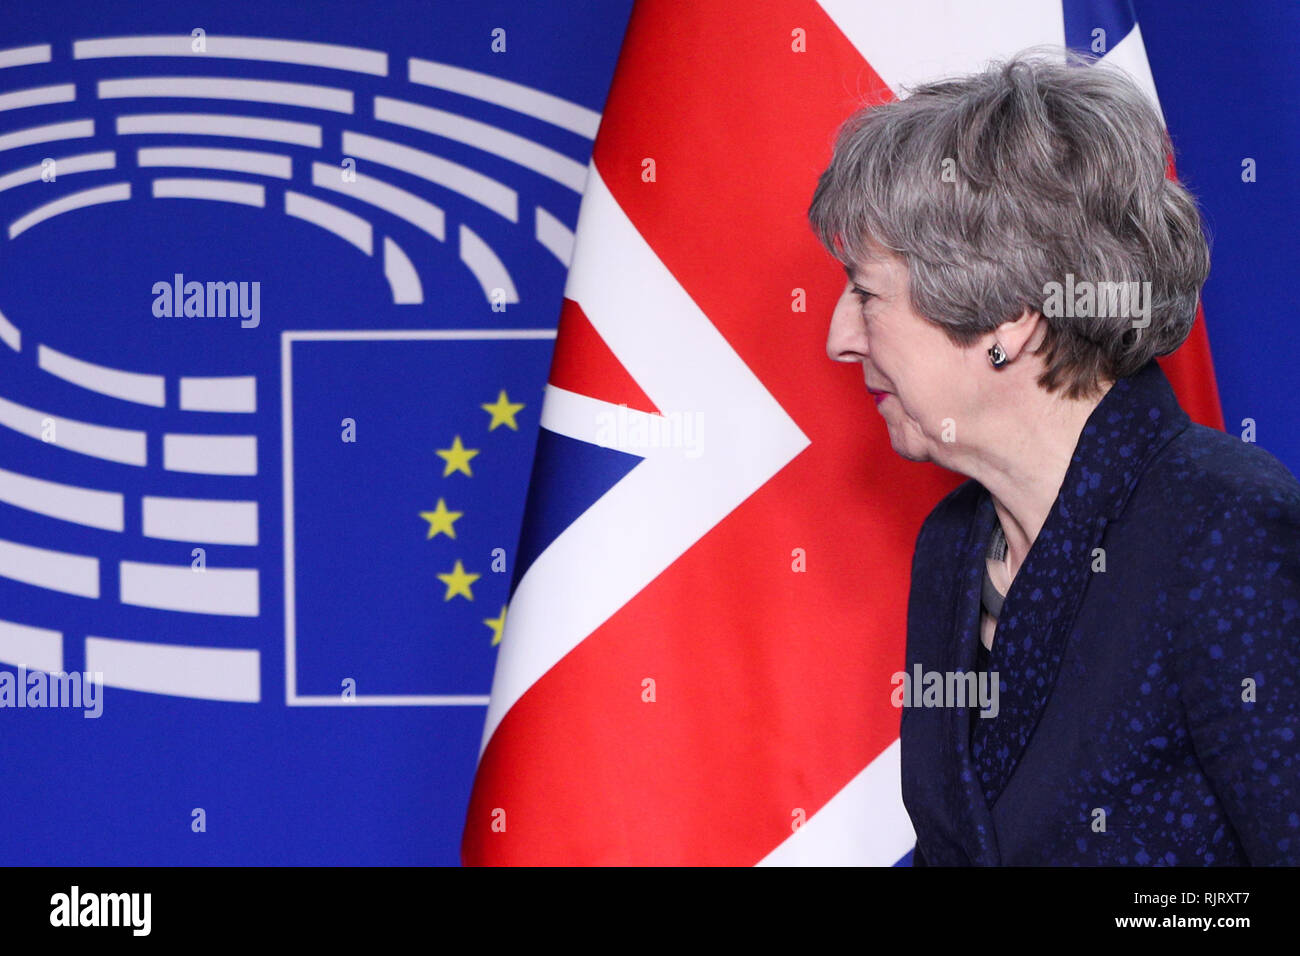 Brussels, Belgium. 7th Feb, 2019. British Prime Minister Theresa May arrives for a meeting with European Parliament President Antonio Tajani at the European Parliament in Brussels, Belgium, Feb. 7, 2019. May arrived in Brussels earlier Thursday to meet Tajani for further talks on Brexit concessions despite the EU's repeated refusal to renegotiate. Credit: Zheng Huansong/Xinhua/Alamy Live News Stock Photo